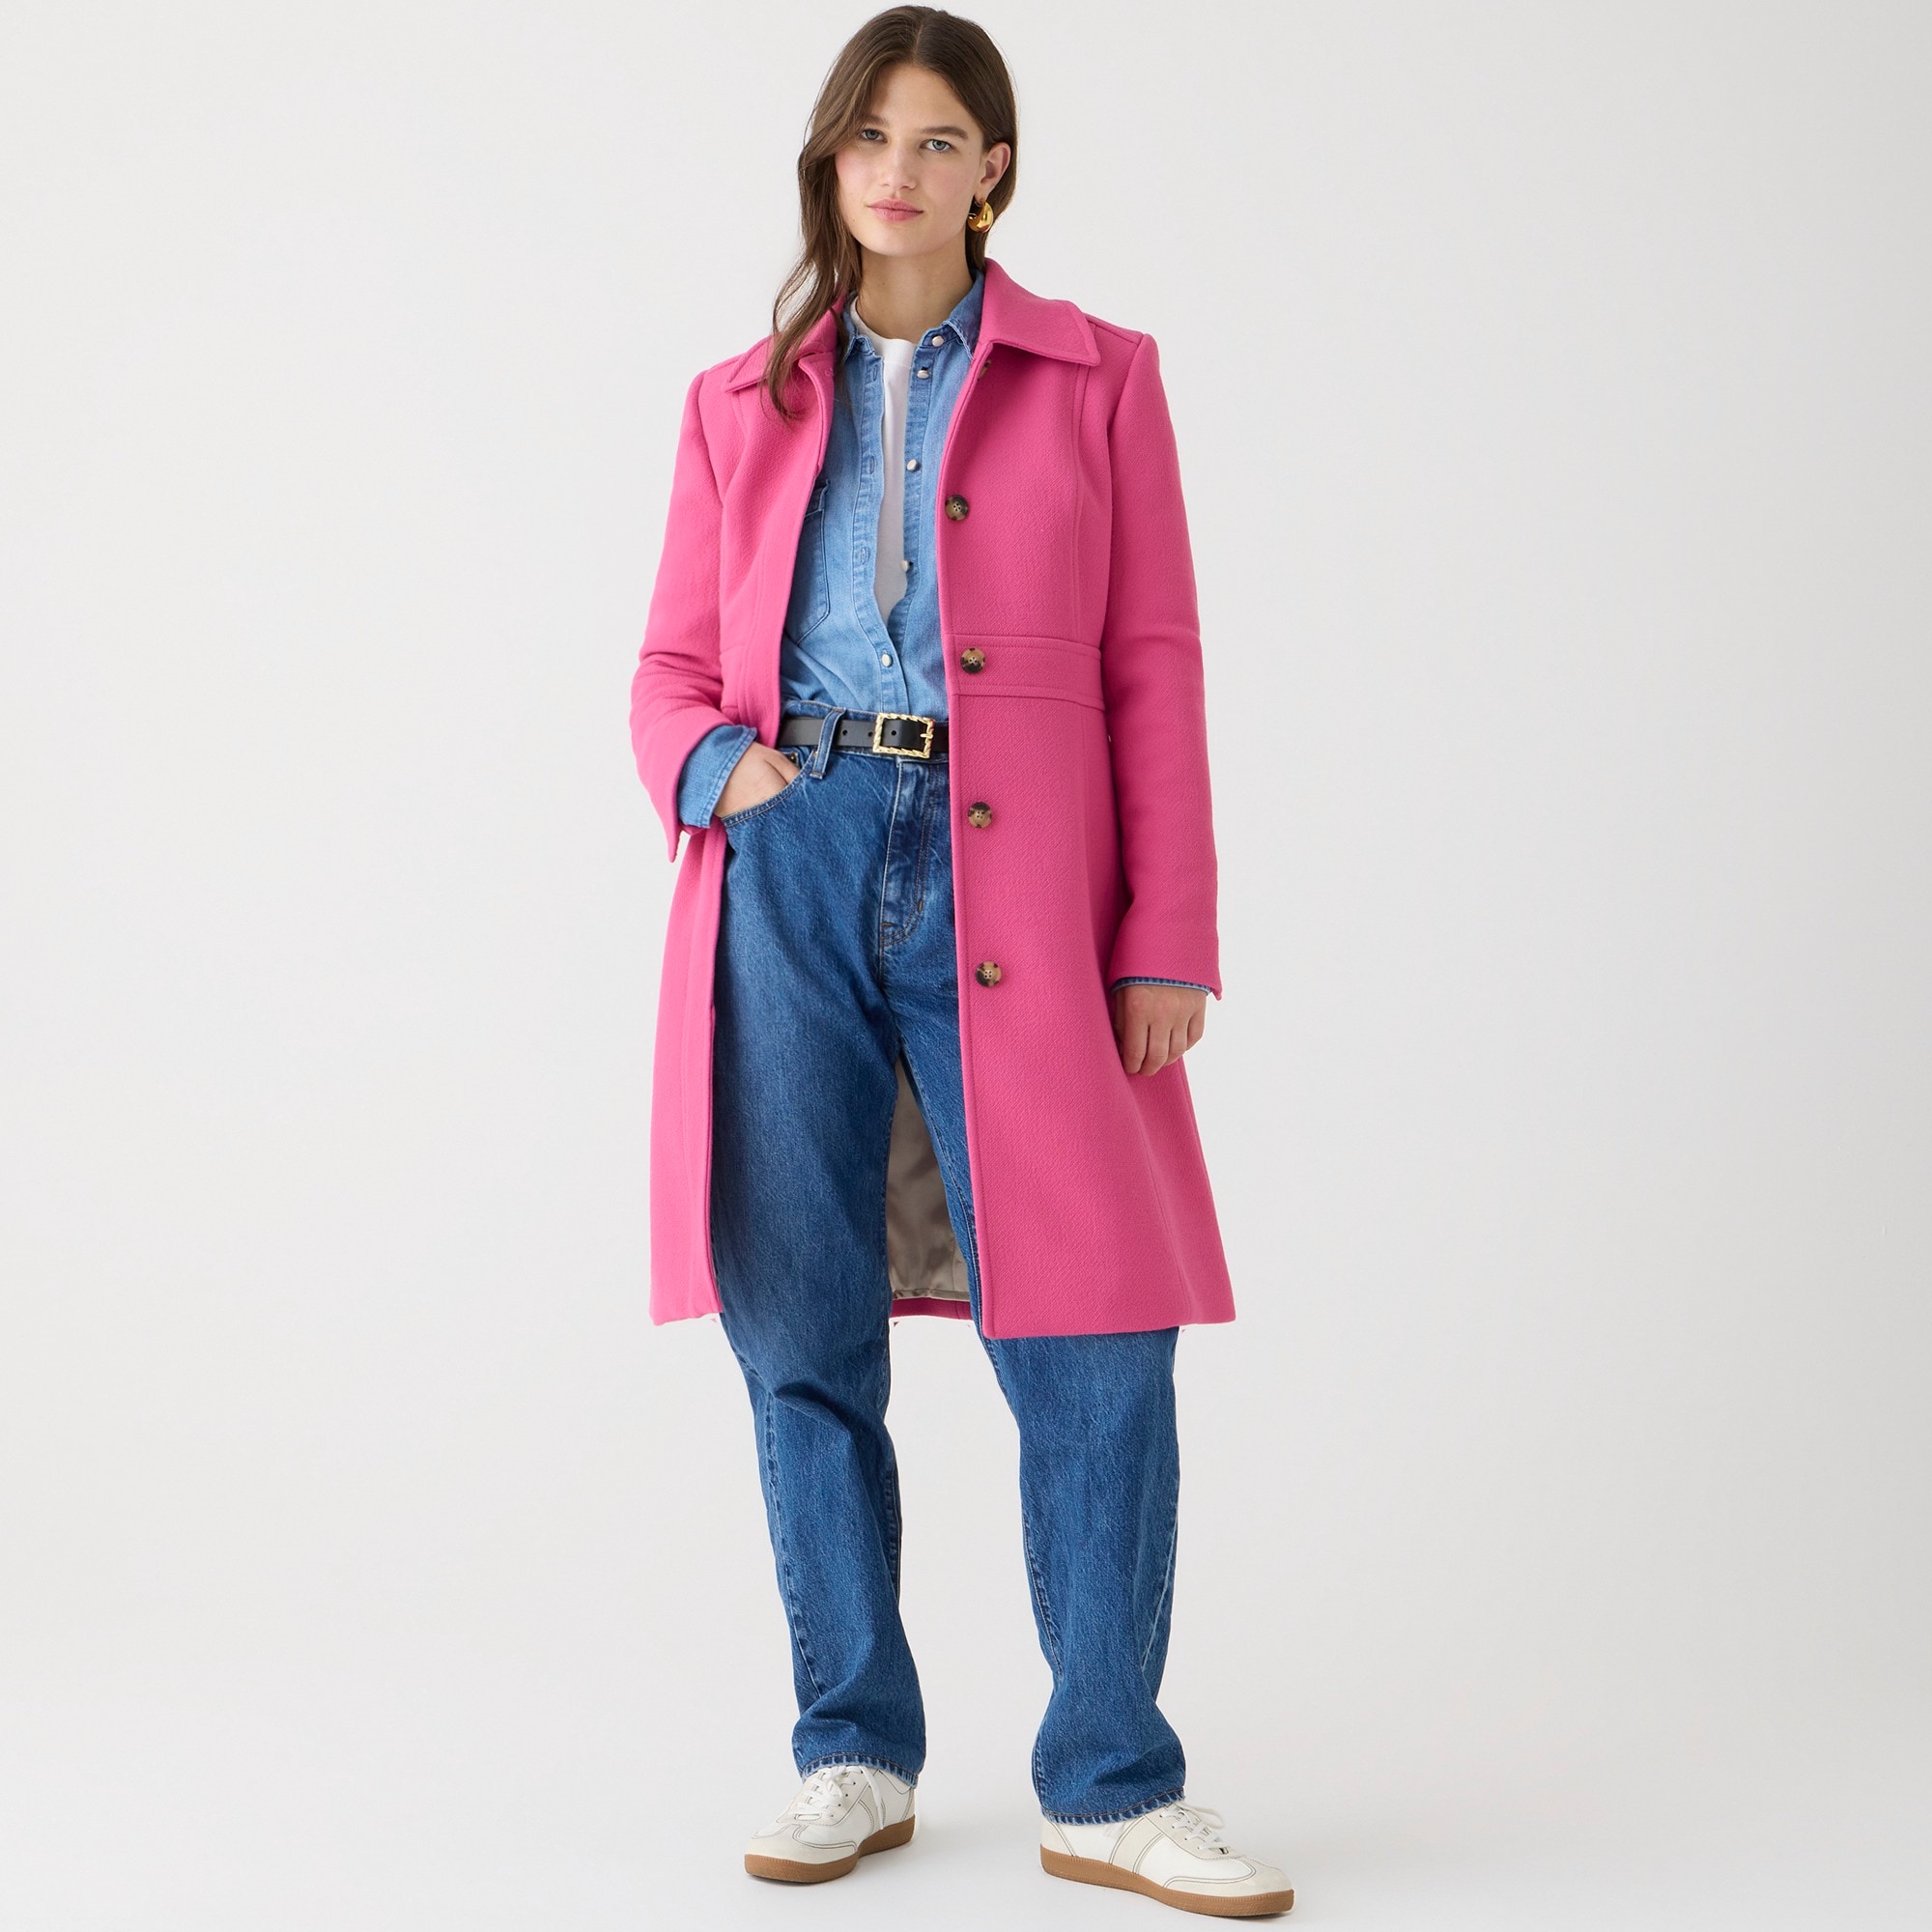 j.crew: new lady day topcoat in italian double-cloth wool blend for women